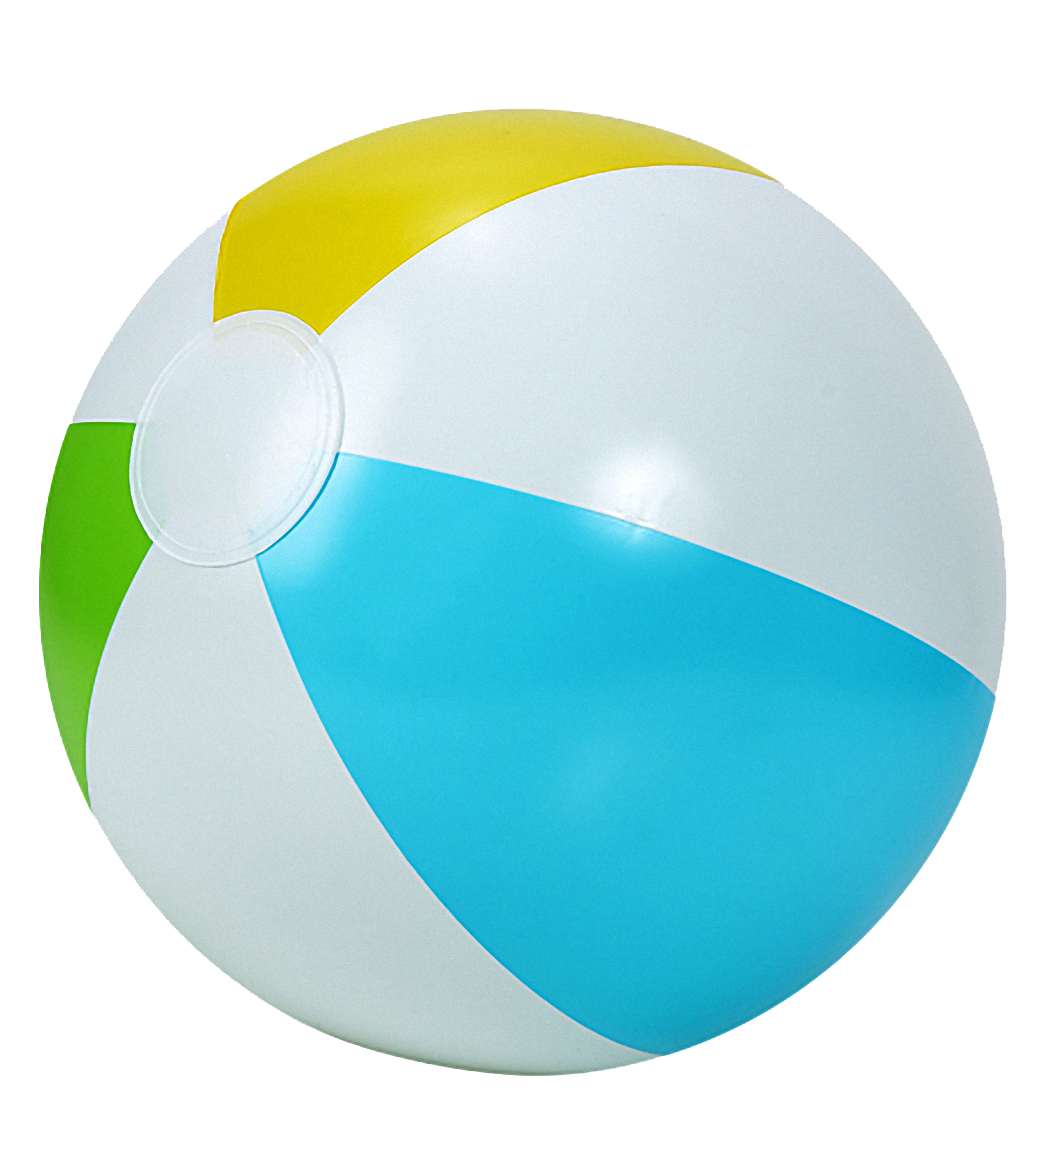 Swimming Pool Ball Png Photos - A Pool, Transparent background PNG HD thumbnail